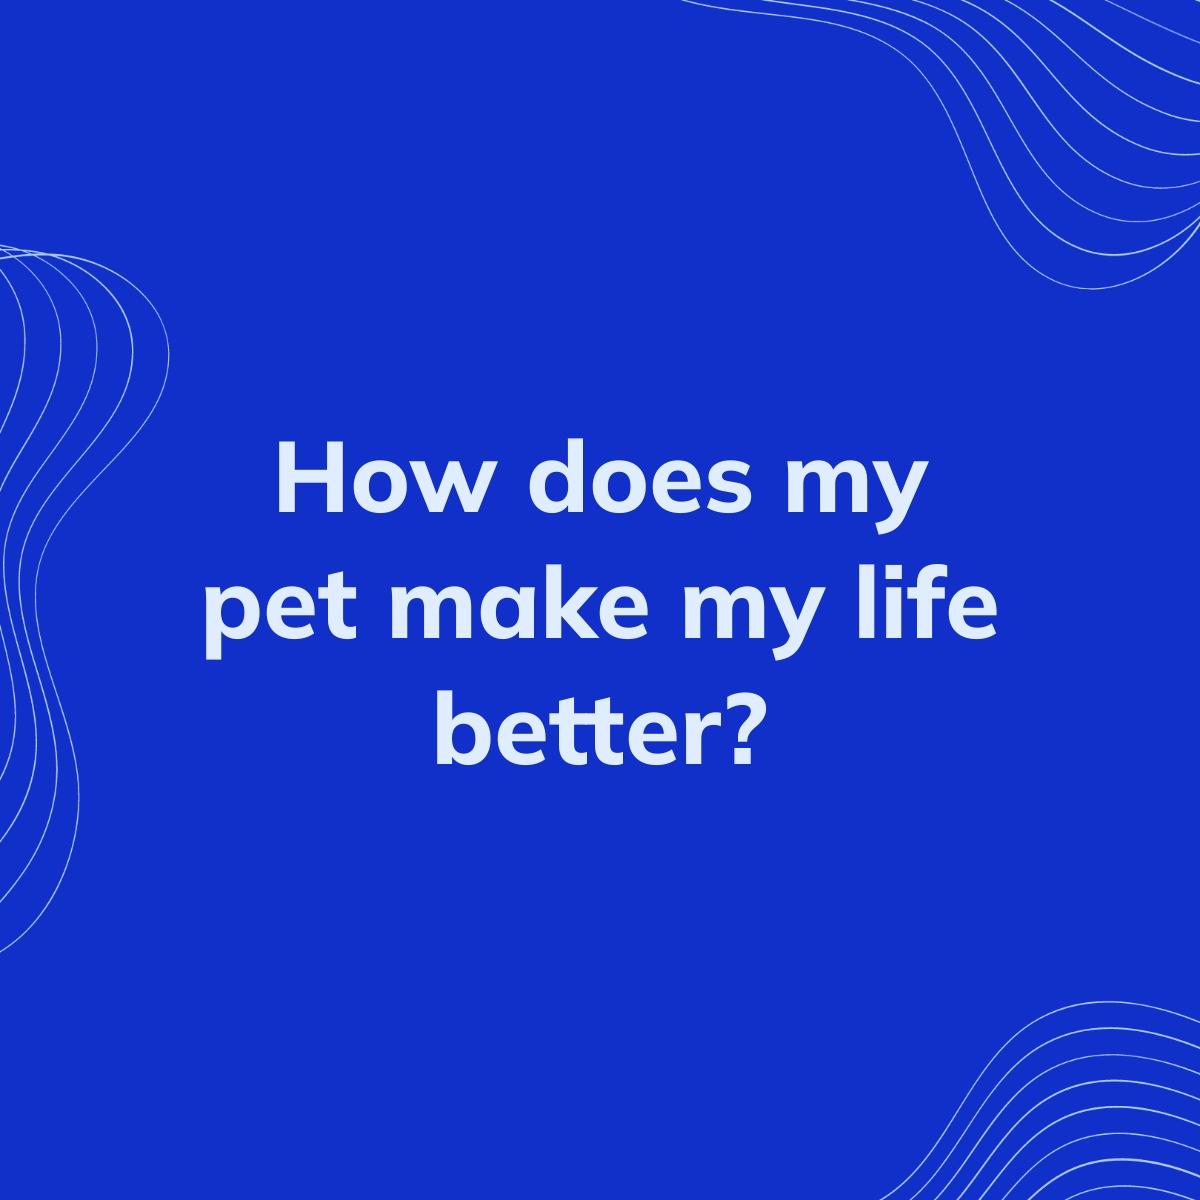 Journal Prompt: How does my pet make my life better?